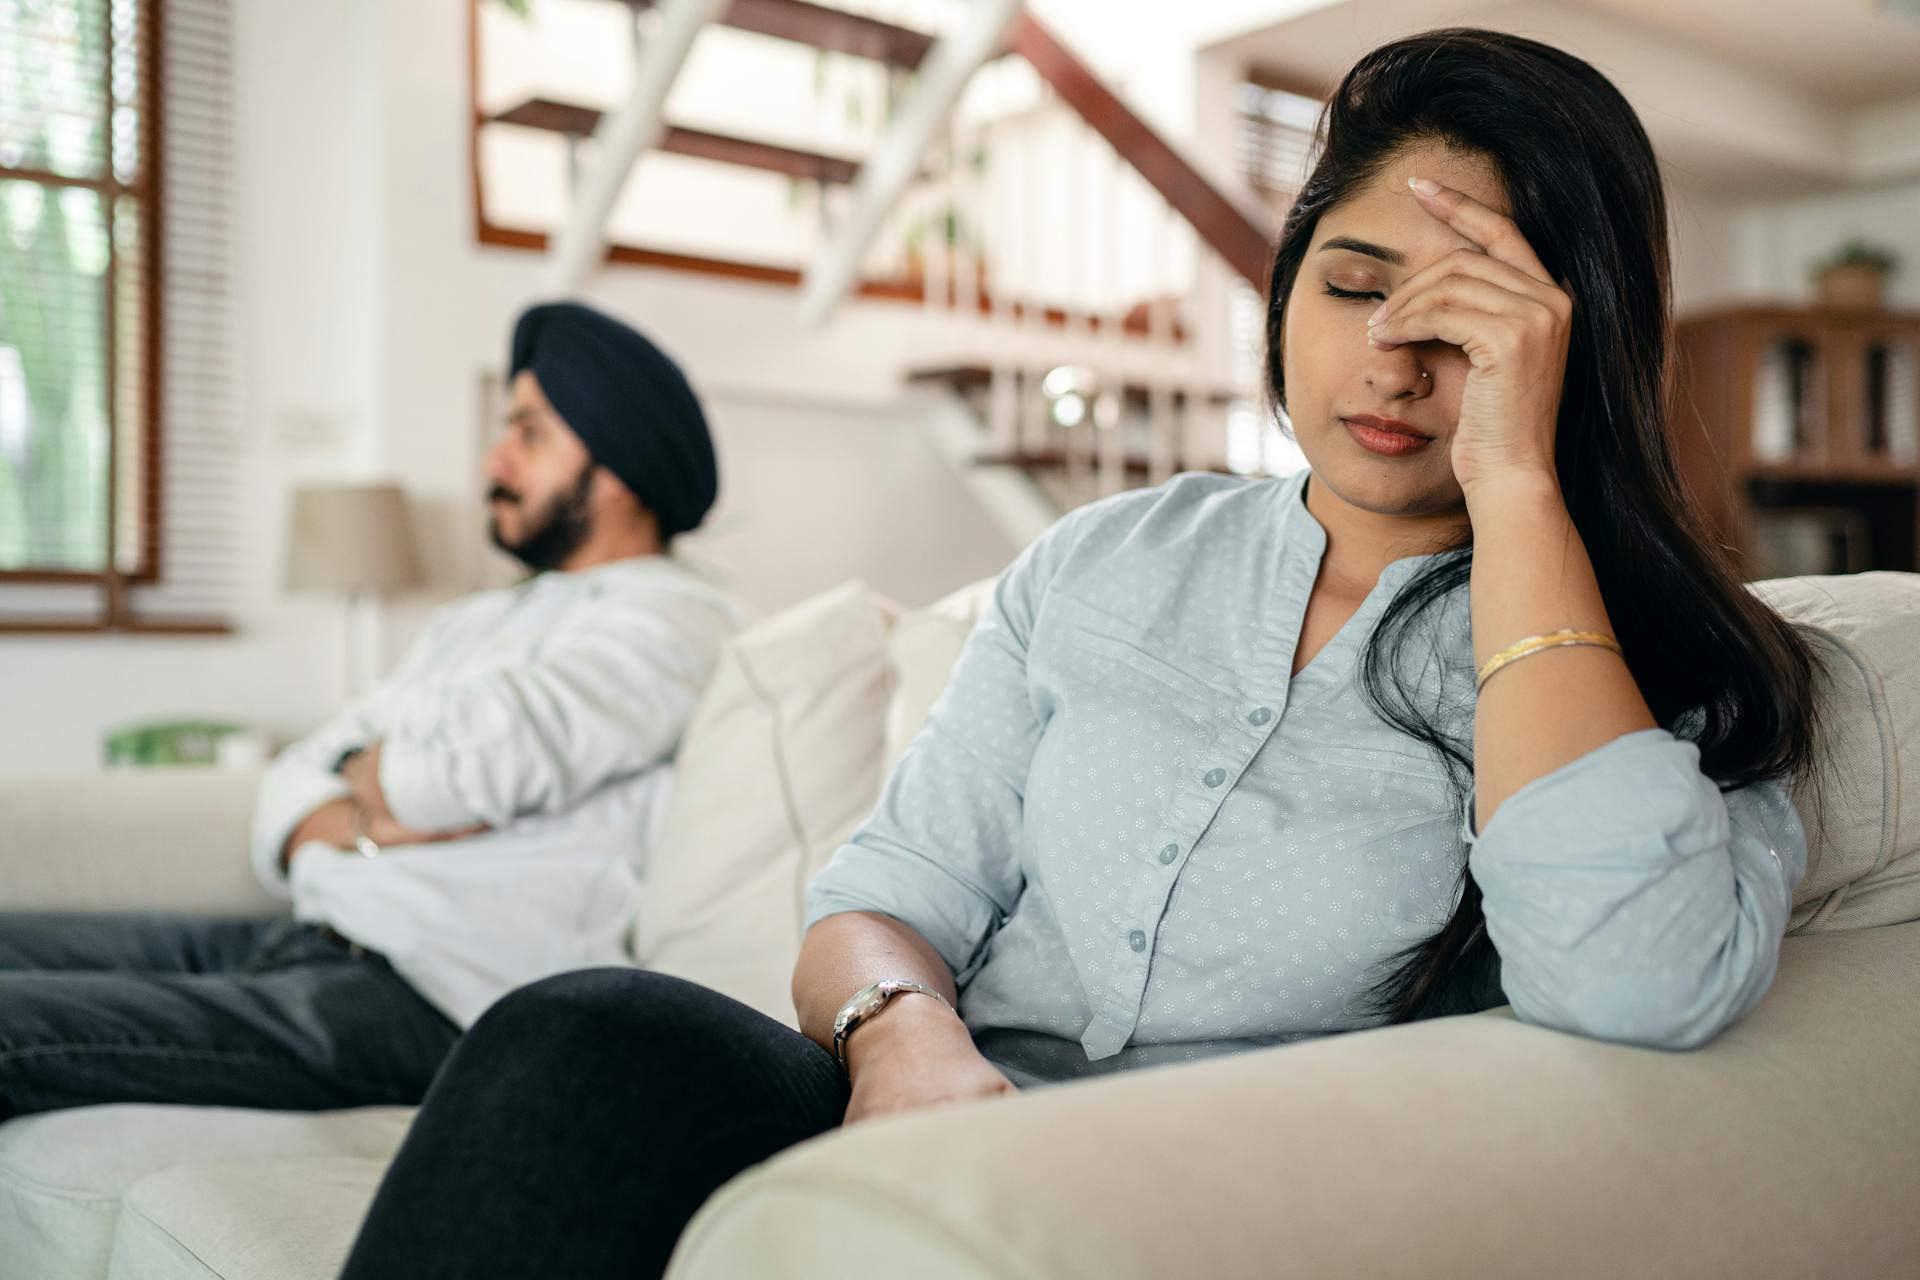 An upset Indian couple after a conflict | Source: Pexels